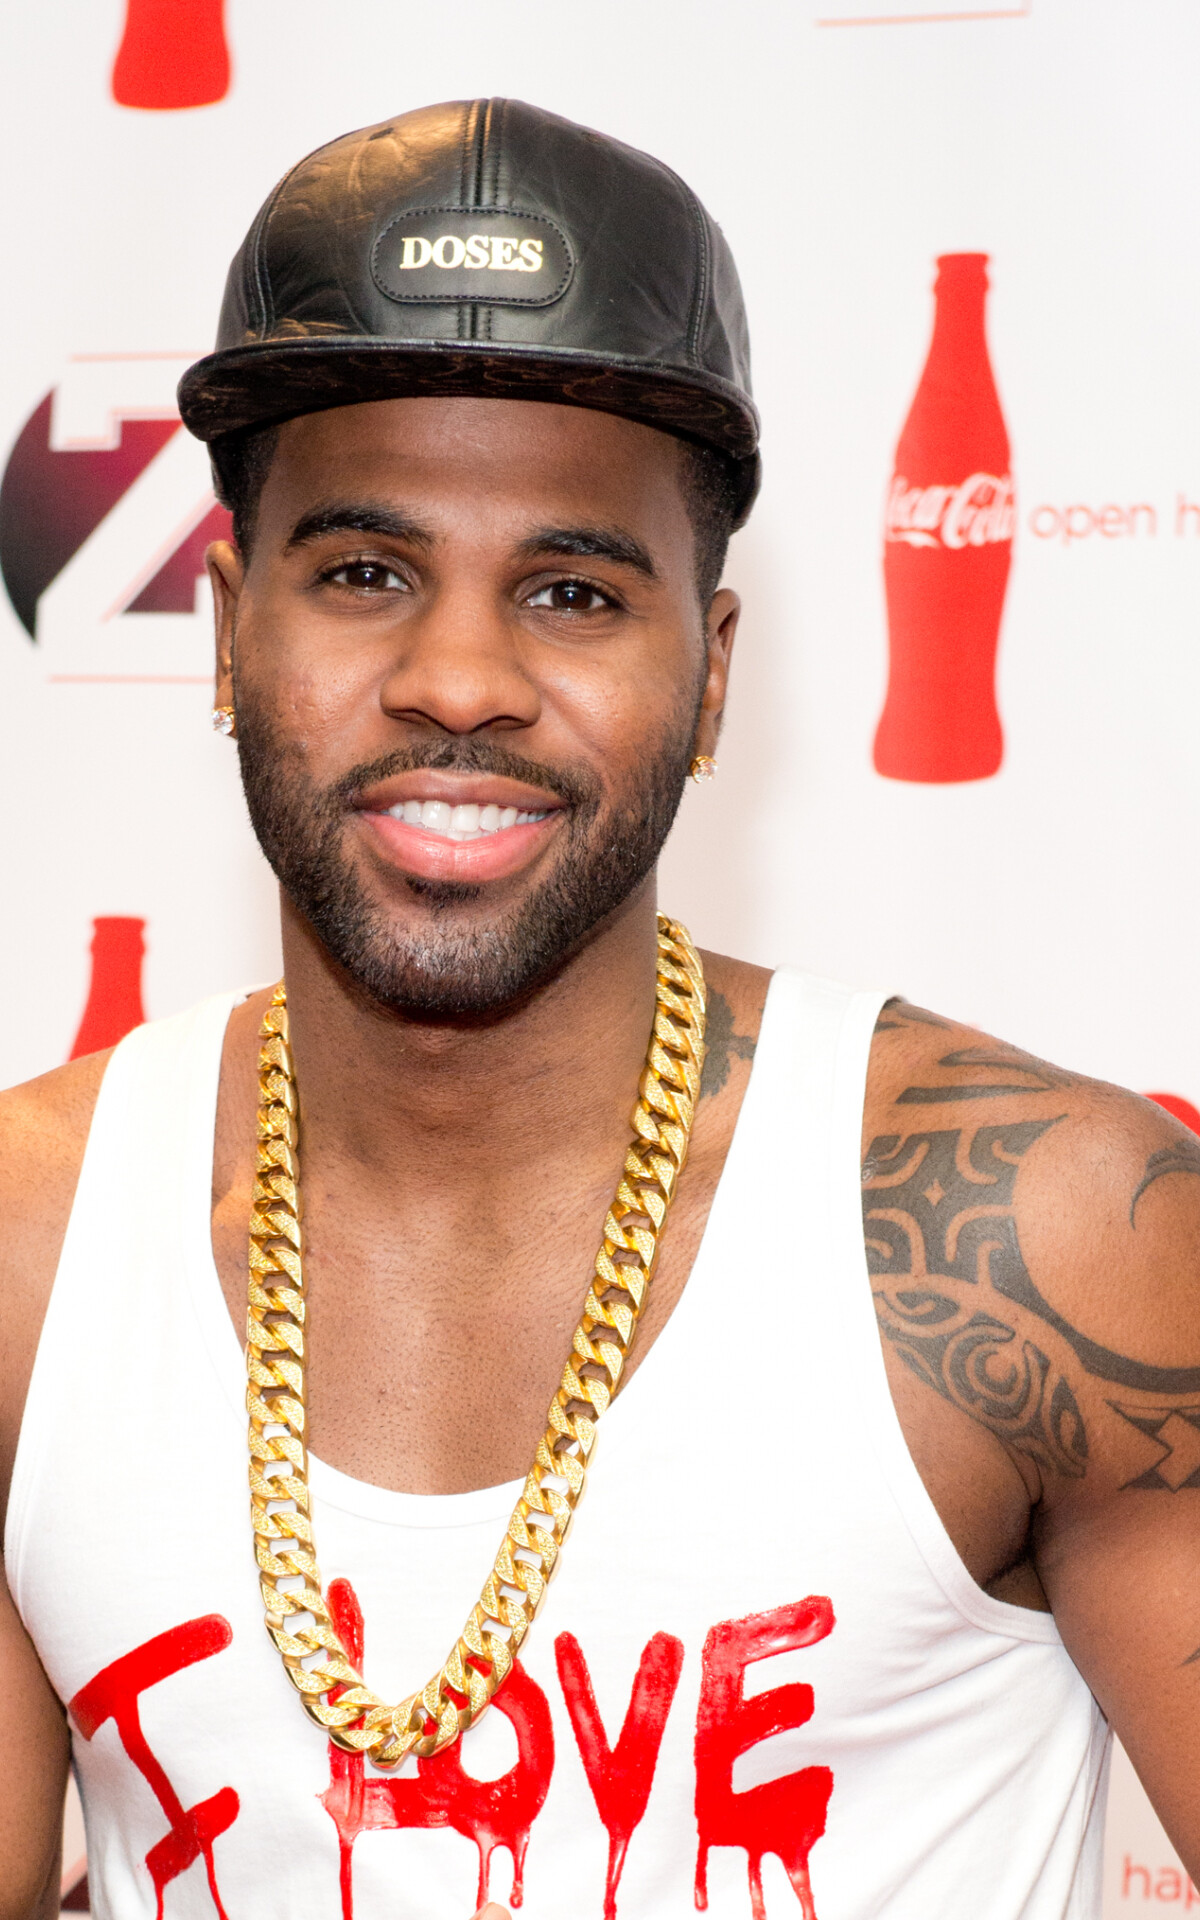 Jason Derulo: The single "Cheyenne" peaked at number 66 on the Billboard Hot 100. 1200x1920 HD Background.